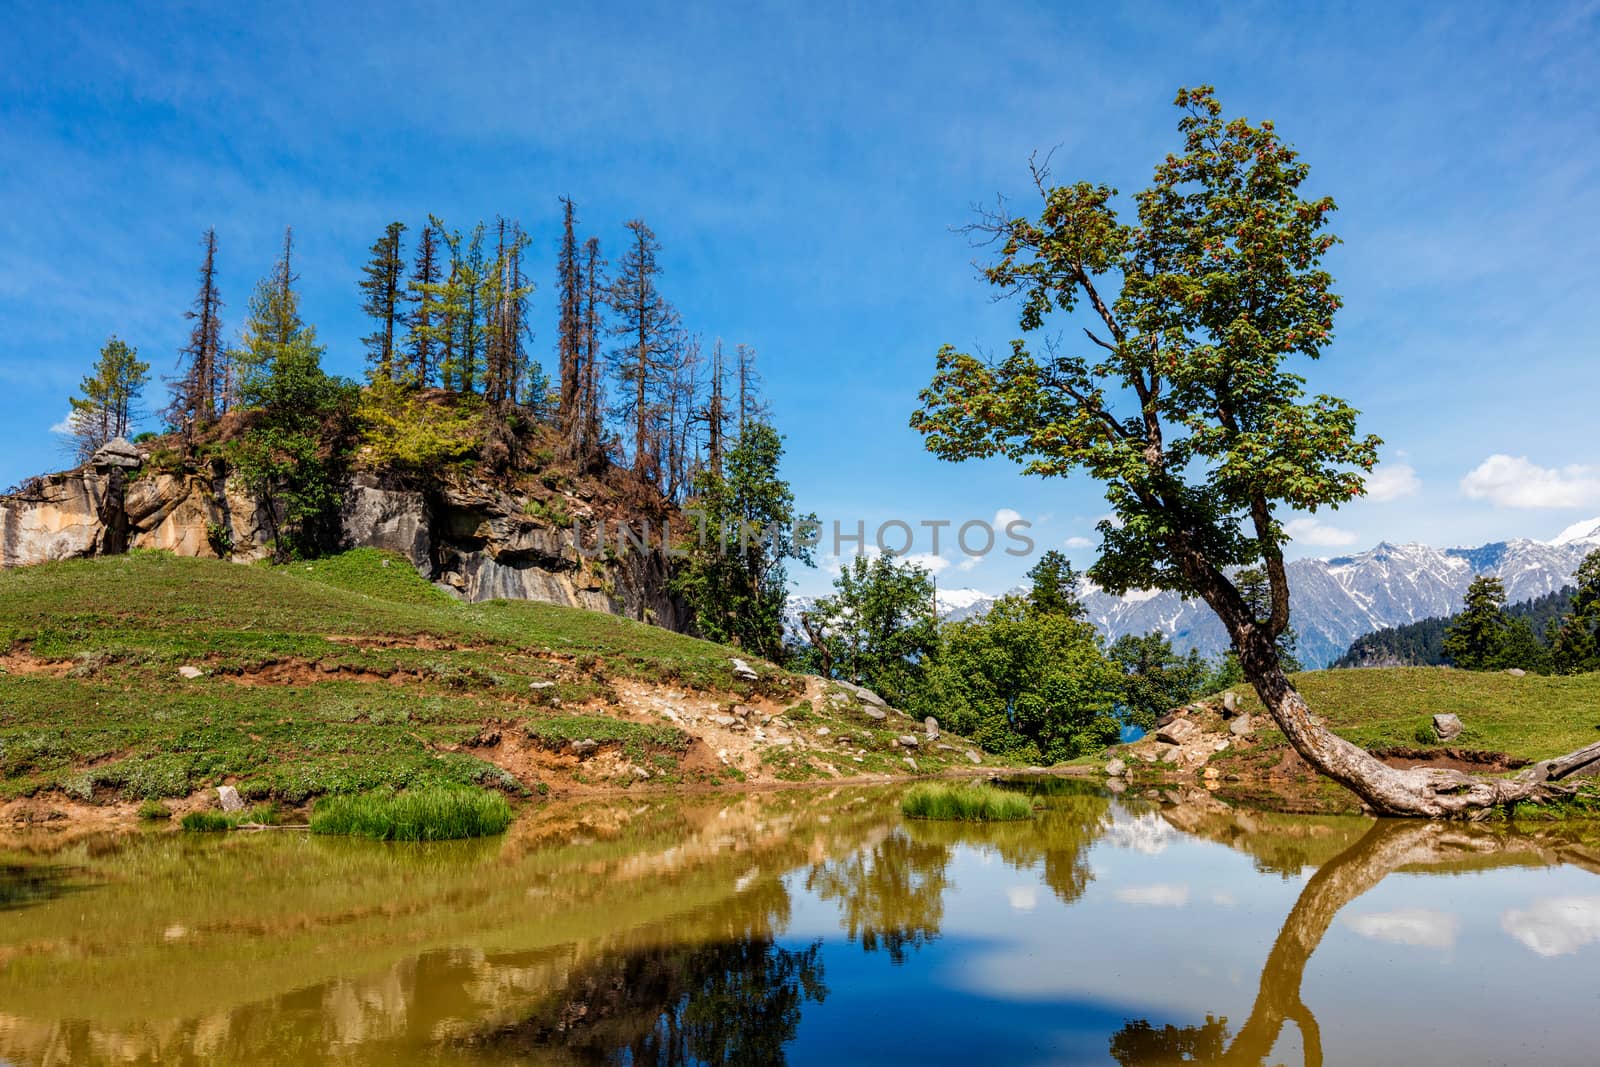 Scenic Indian Himalayan landscape scenery in Himalayas with tree and small lake. Himachal Pradesh, India